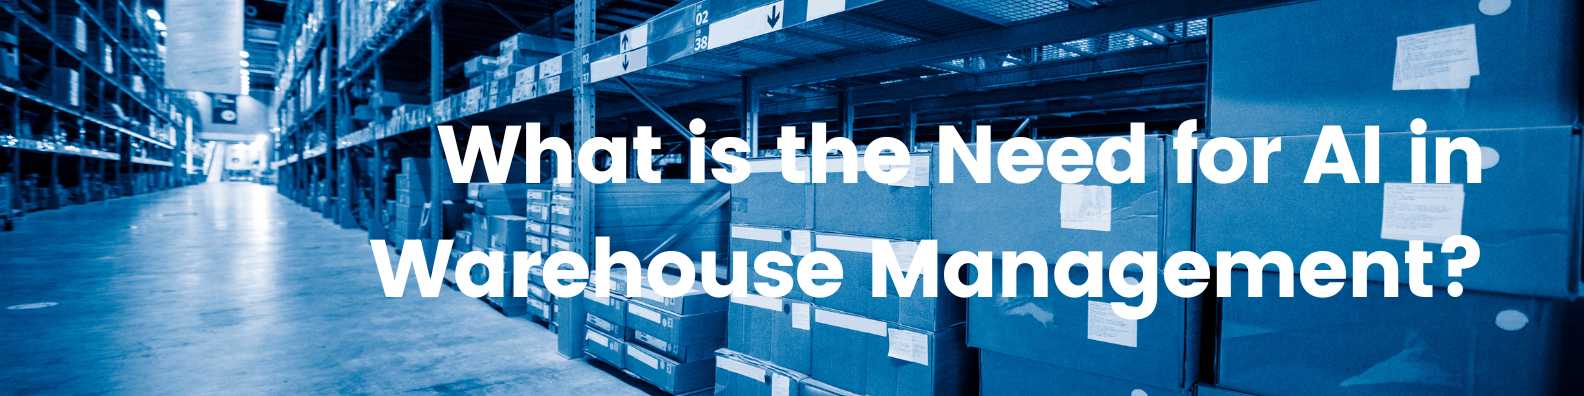 What is the Need for AI in Warehouse Management